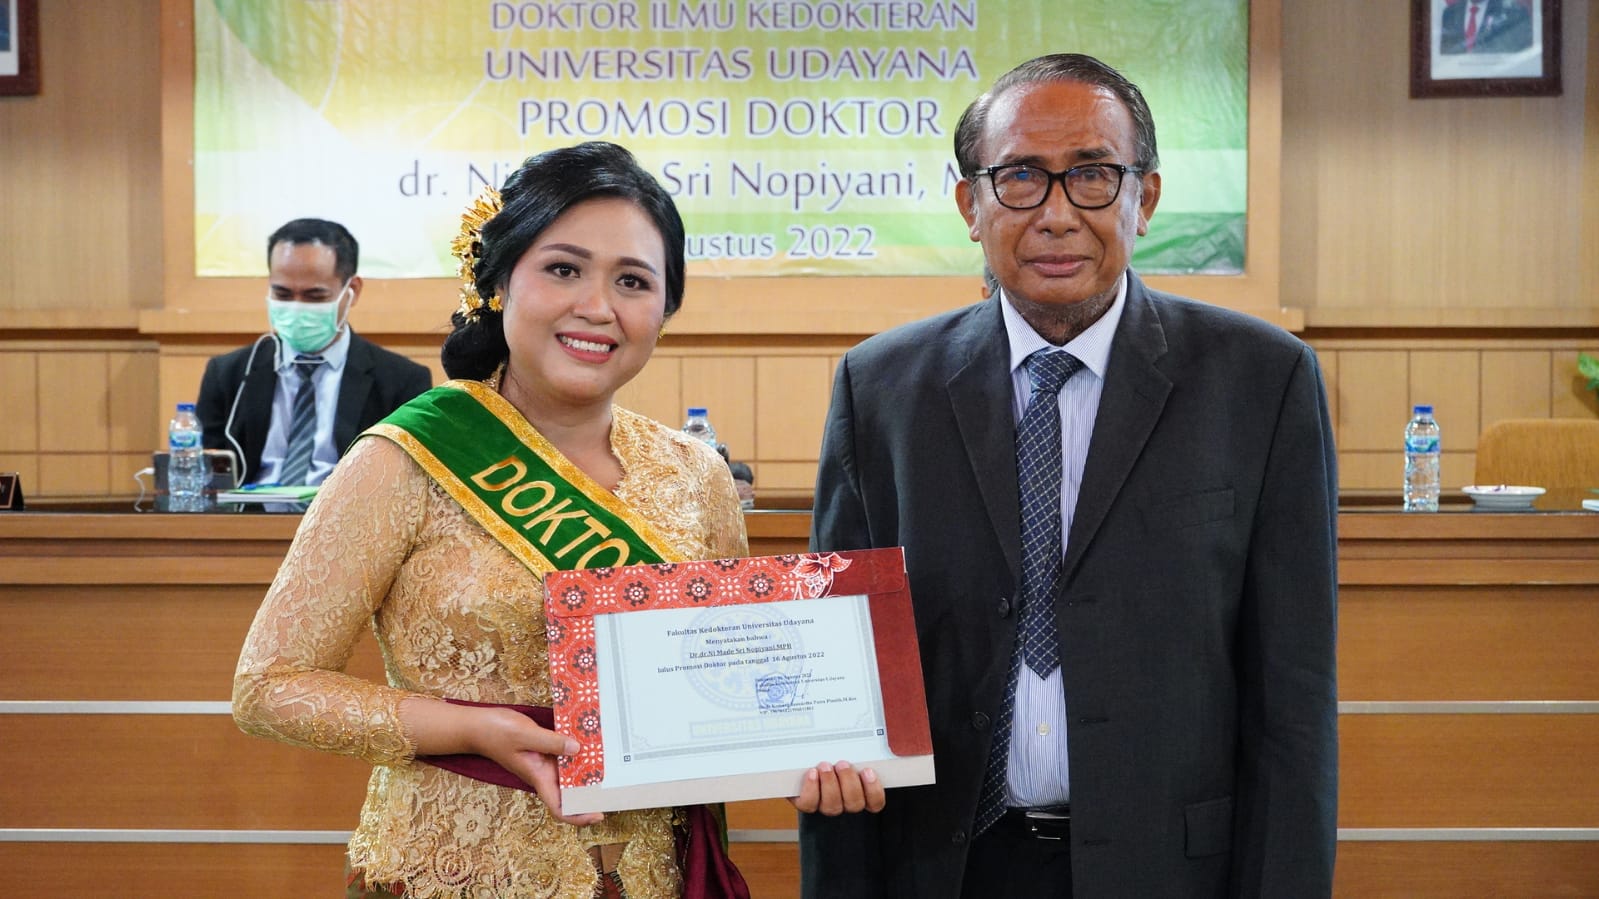 Comprehensive Tourism Health Education Model Leads Sri Nopiyani to Obtain Doctoral Degree in Medical Sciences